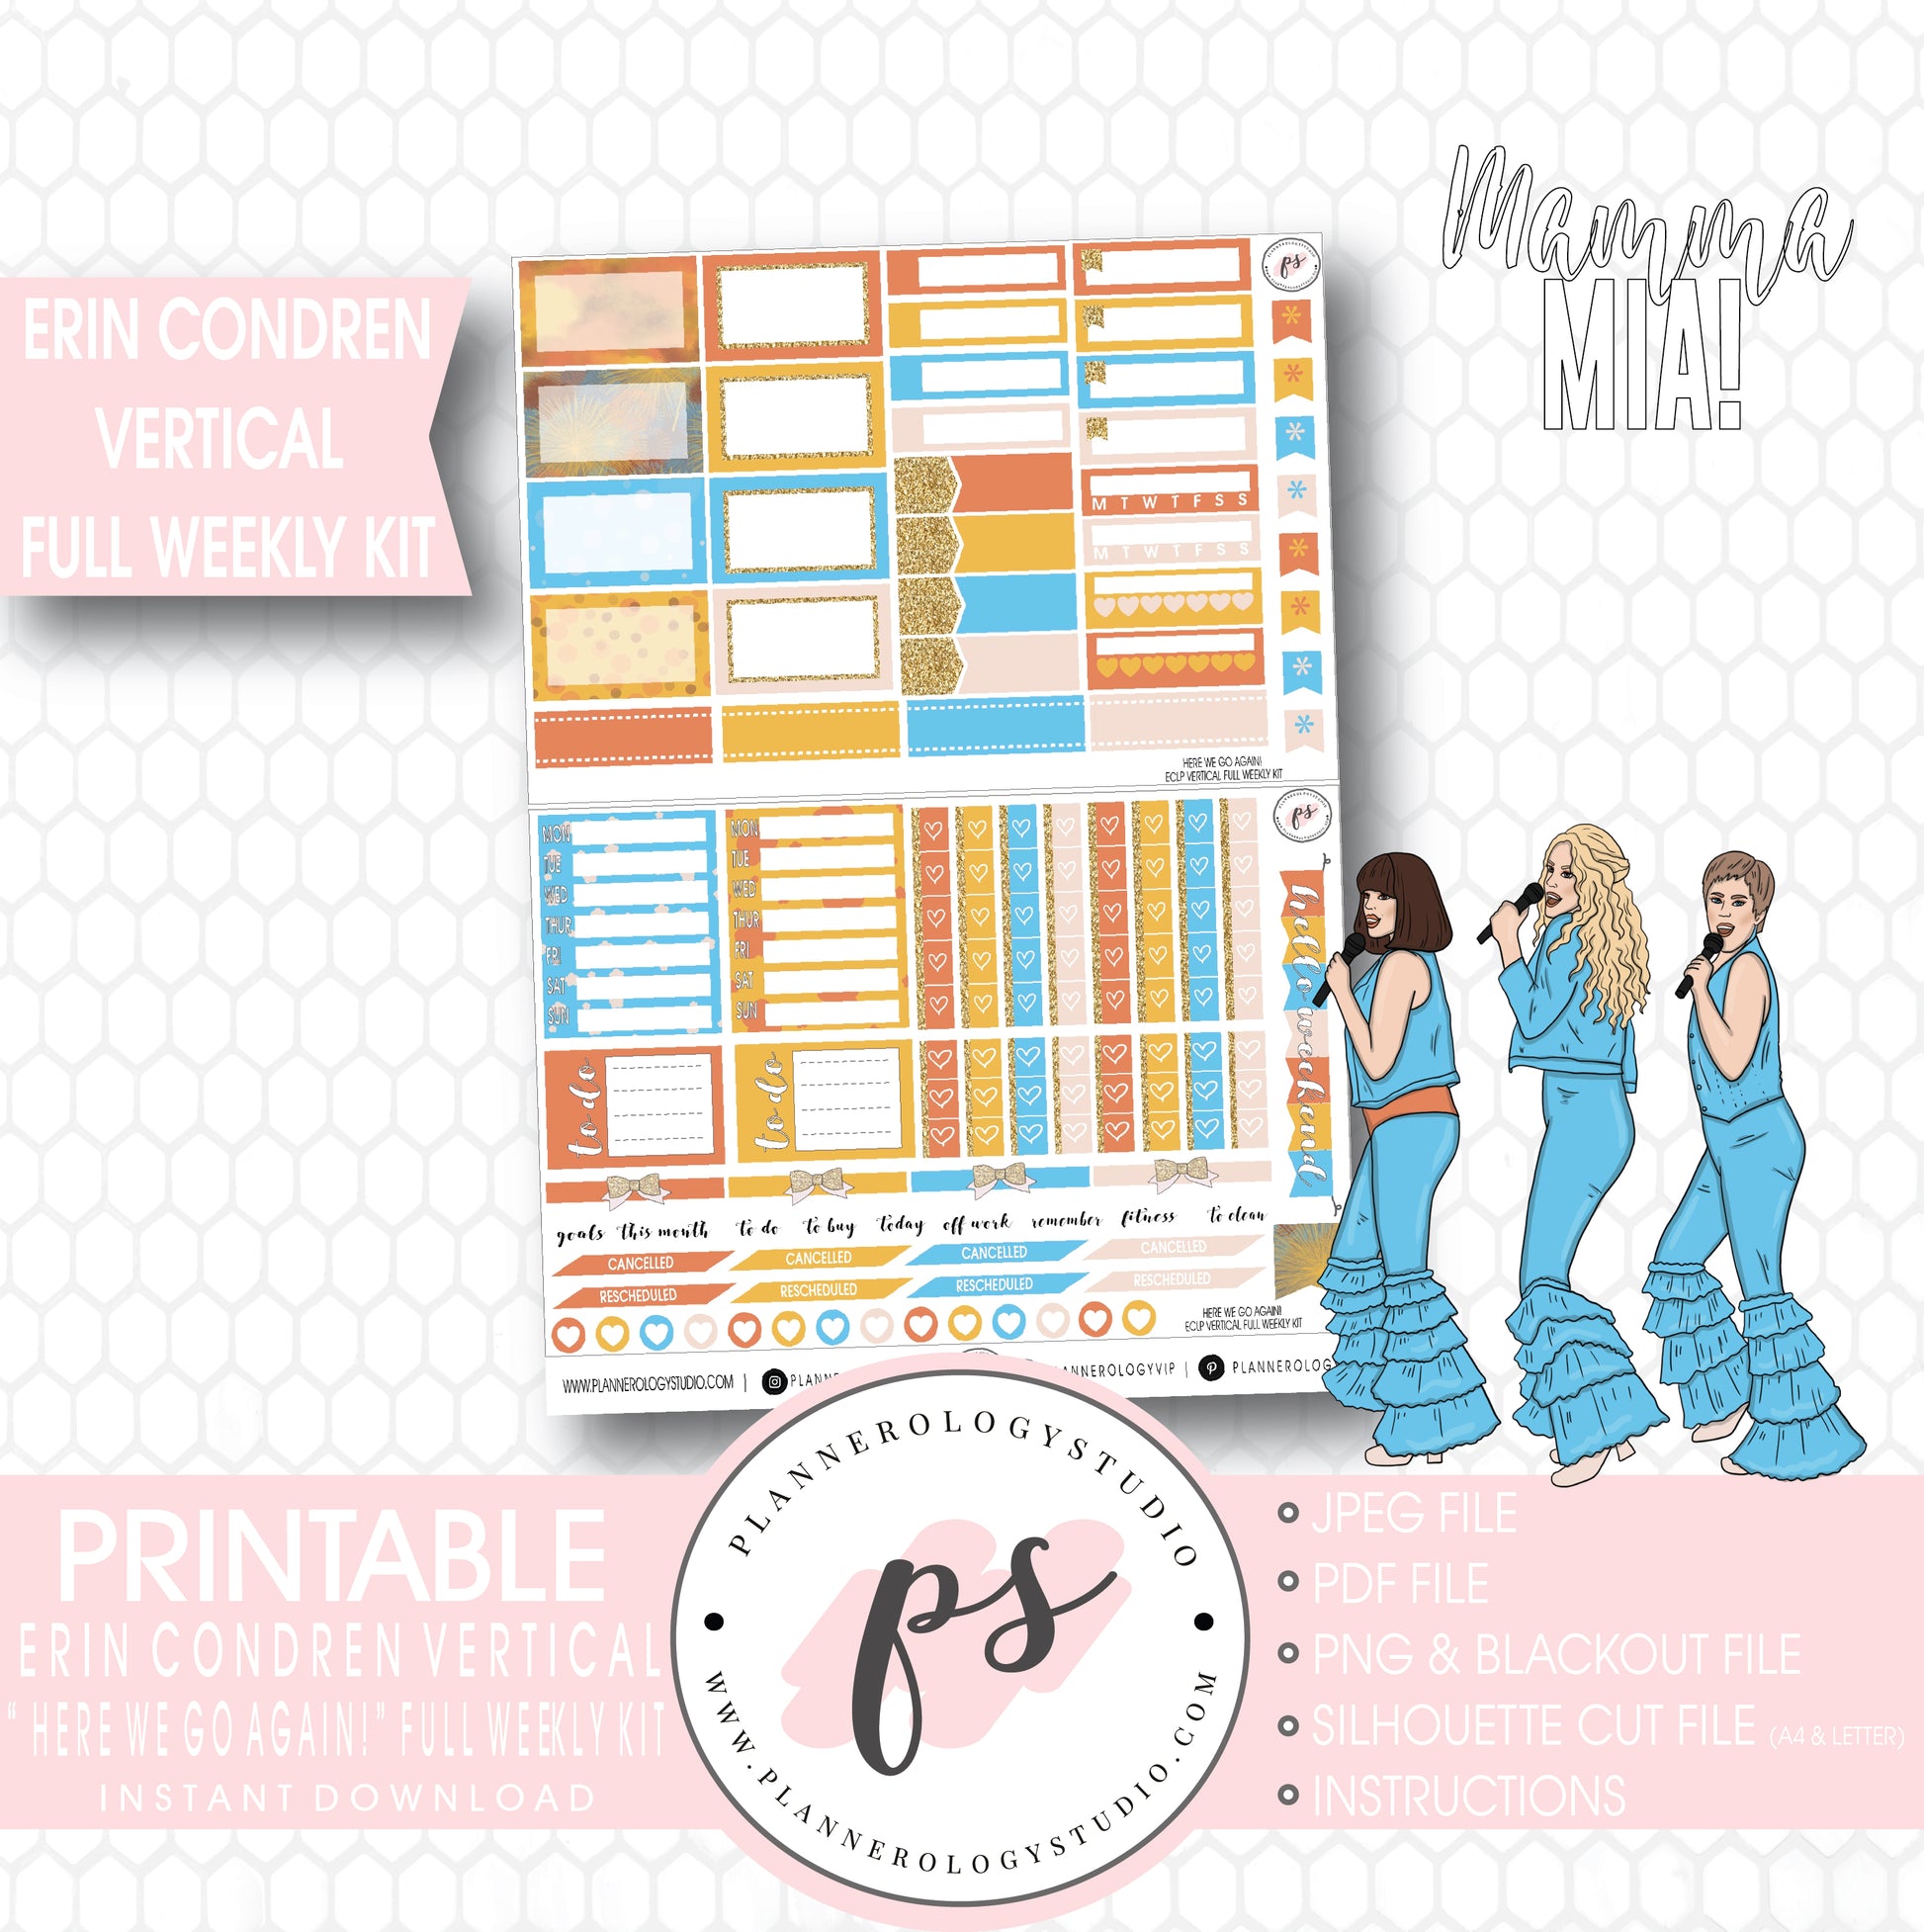 Here We Go Again! Mamma Mia Full Weekly Kit Printable Planner Stickers (for use with Erin Condren Vertical) - Plannerologystudio